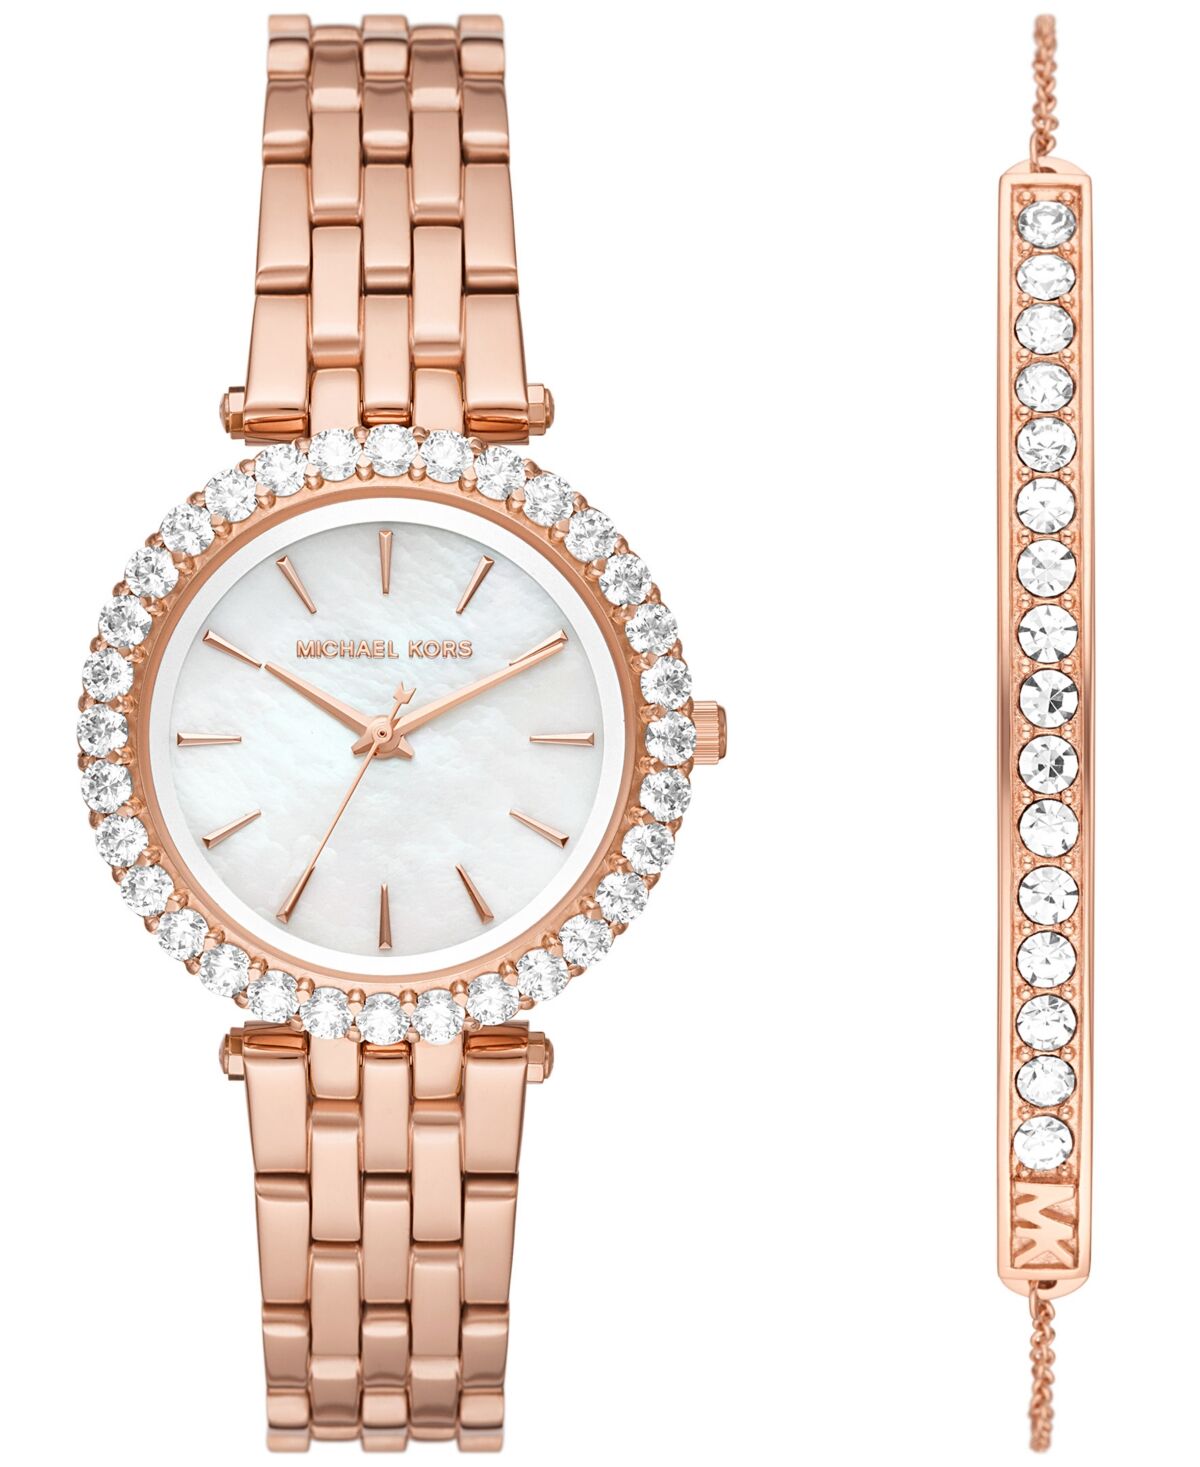 Michael Kors Women's Darci Three-Hand Rose Gold-Tone Stainless Steel Watch 34mm and Bracelet Set, 2 Pieces - Rose Gold-Tone